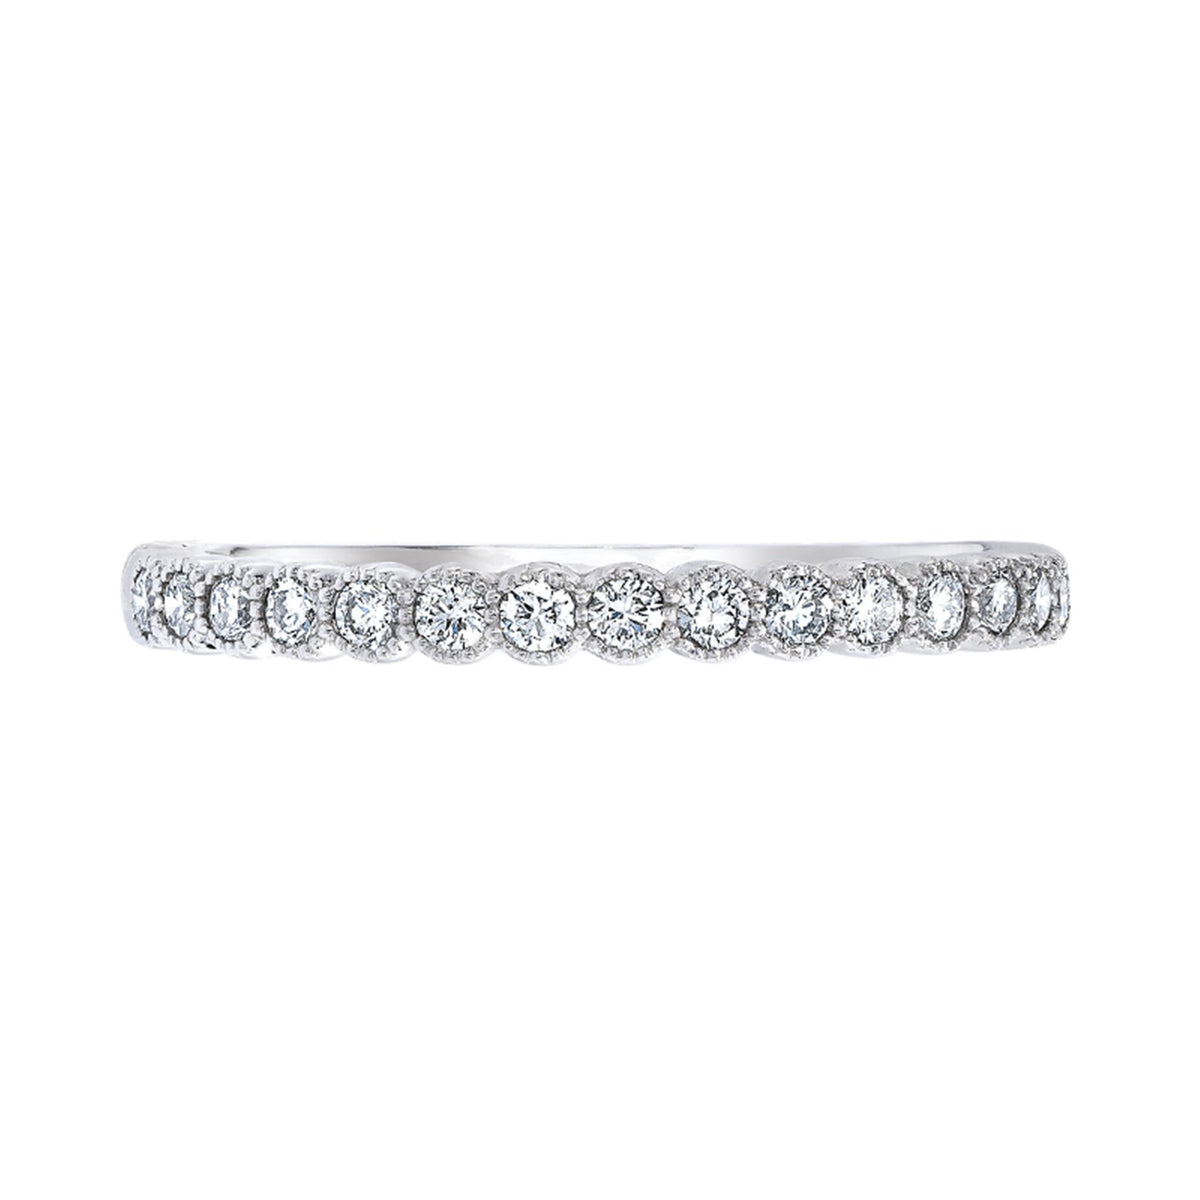 14Kt White Gold Vintage Inspired Wedding Ring With 0.85cttw Natural Diamonds